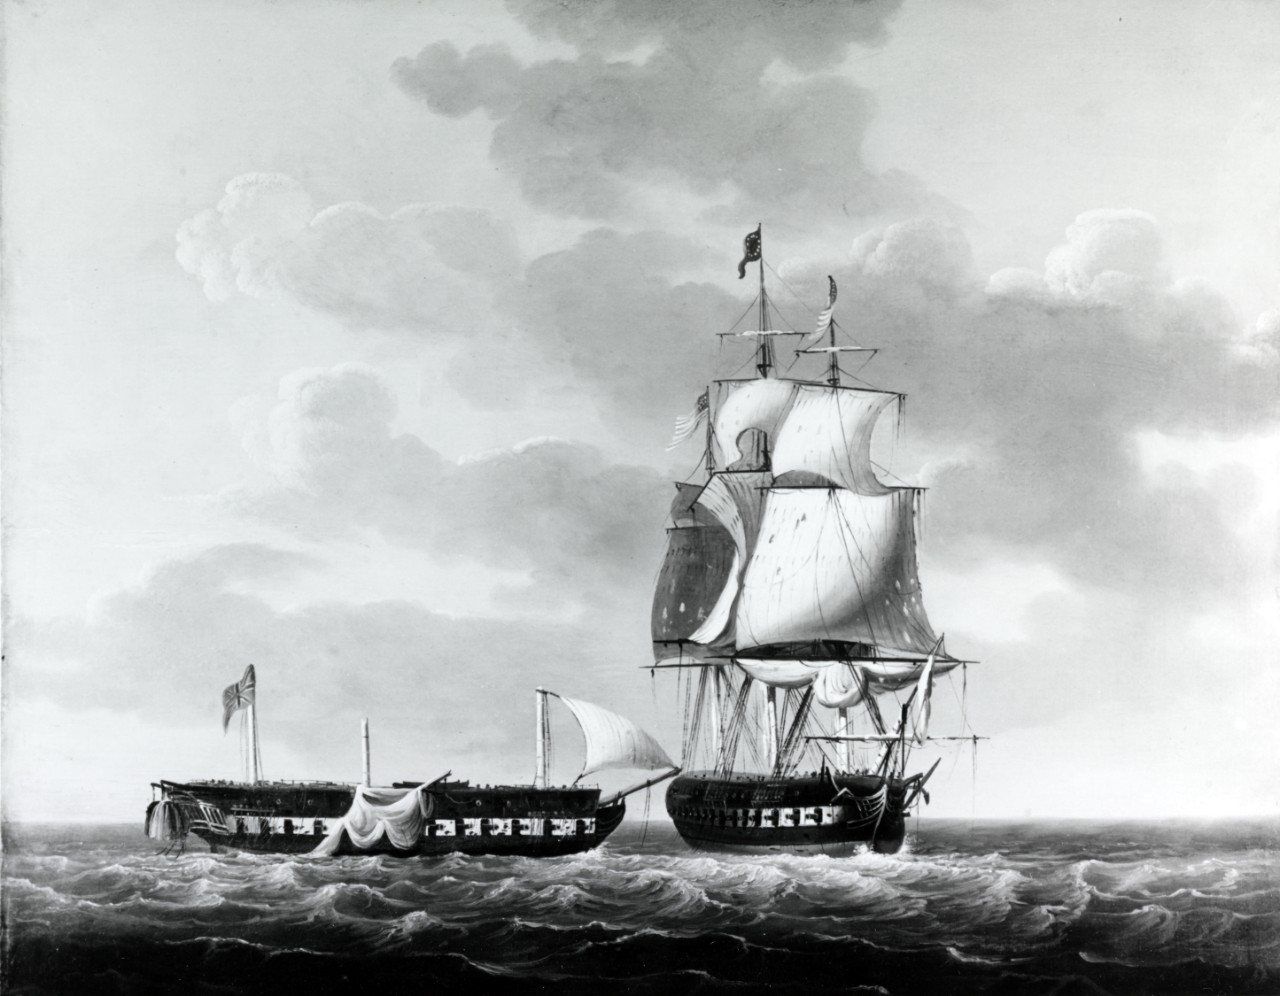 Photo #: NH 85507-KN Action between USS Constitution and HMS Guerriere, 19 August 1812